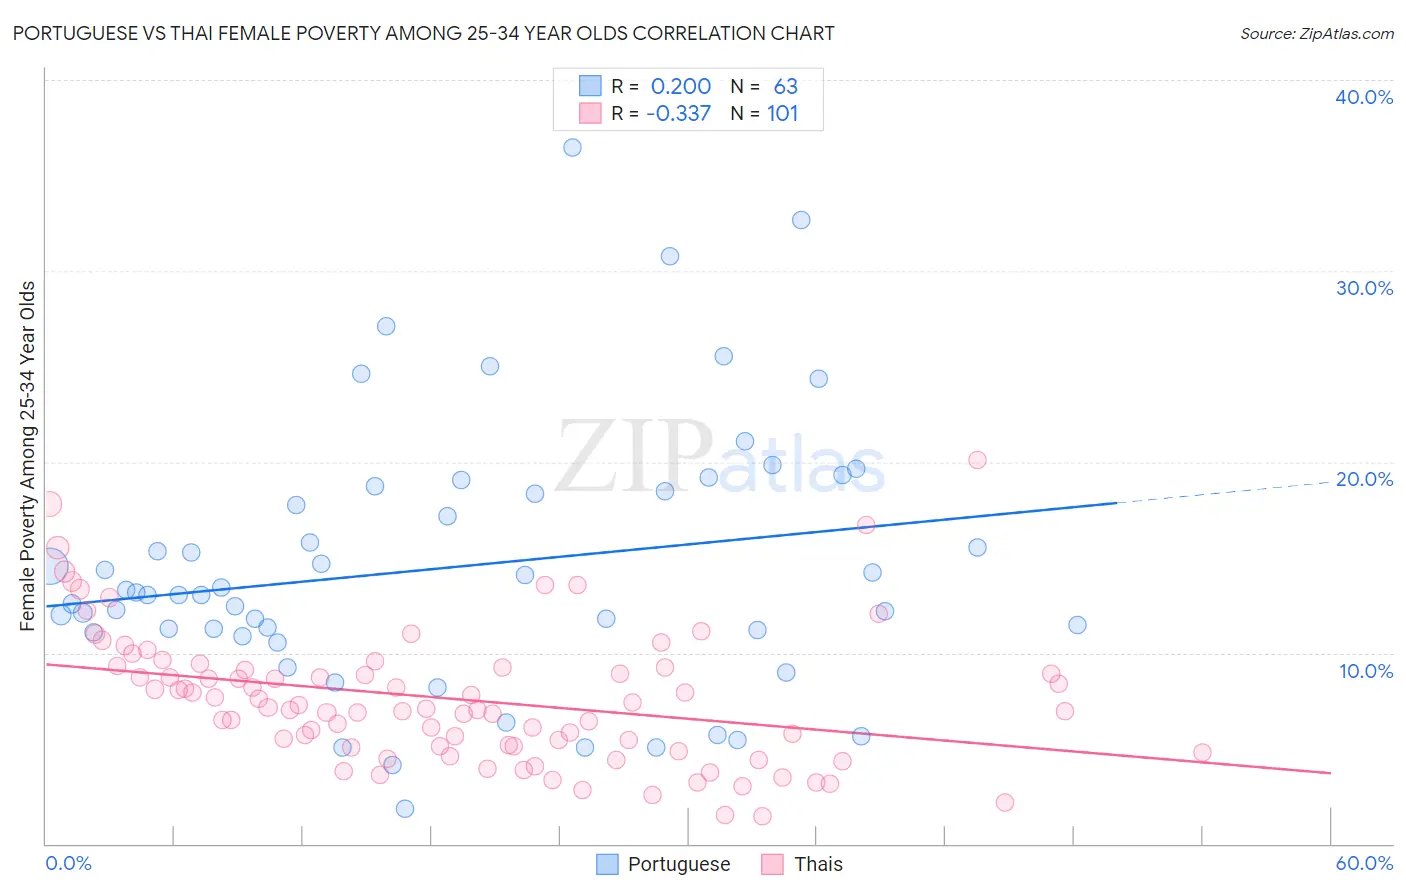 Portuguese vs Thai Female Poverty Among 25-34 Year Olds